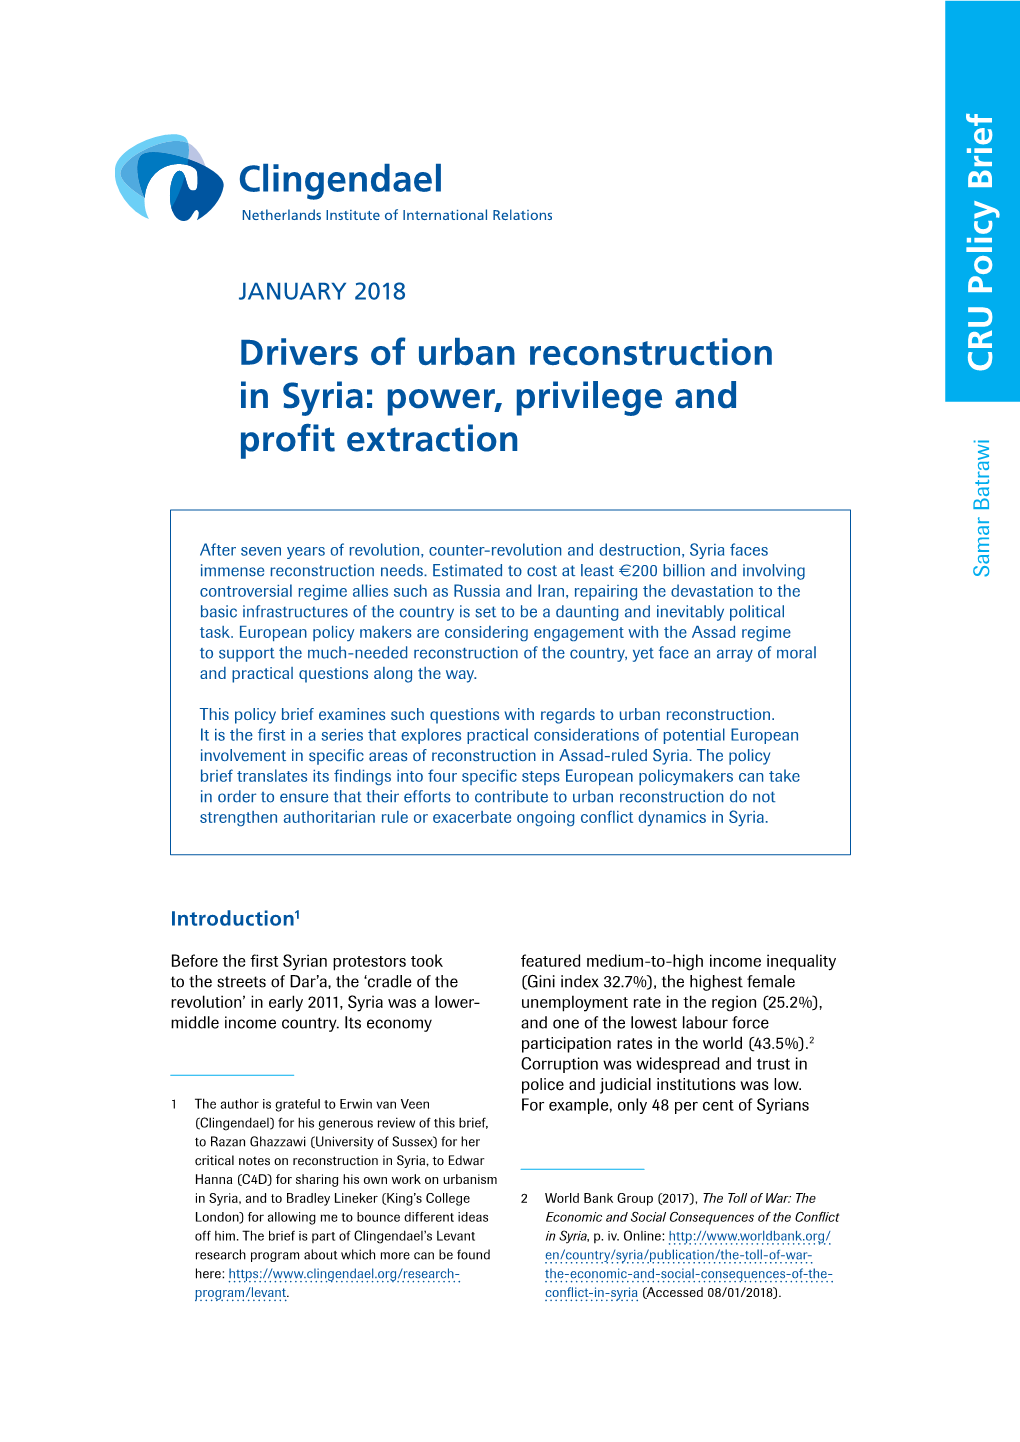 Drivers of Urban Reconstruction in Syria: Power, Privilege and Profit